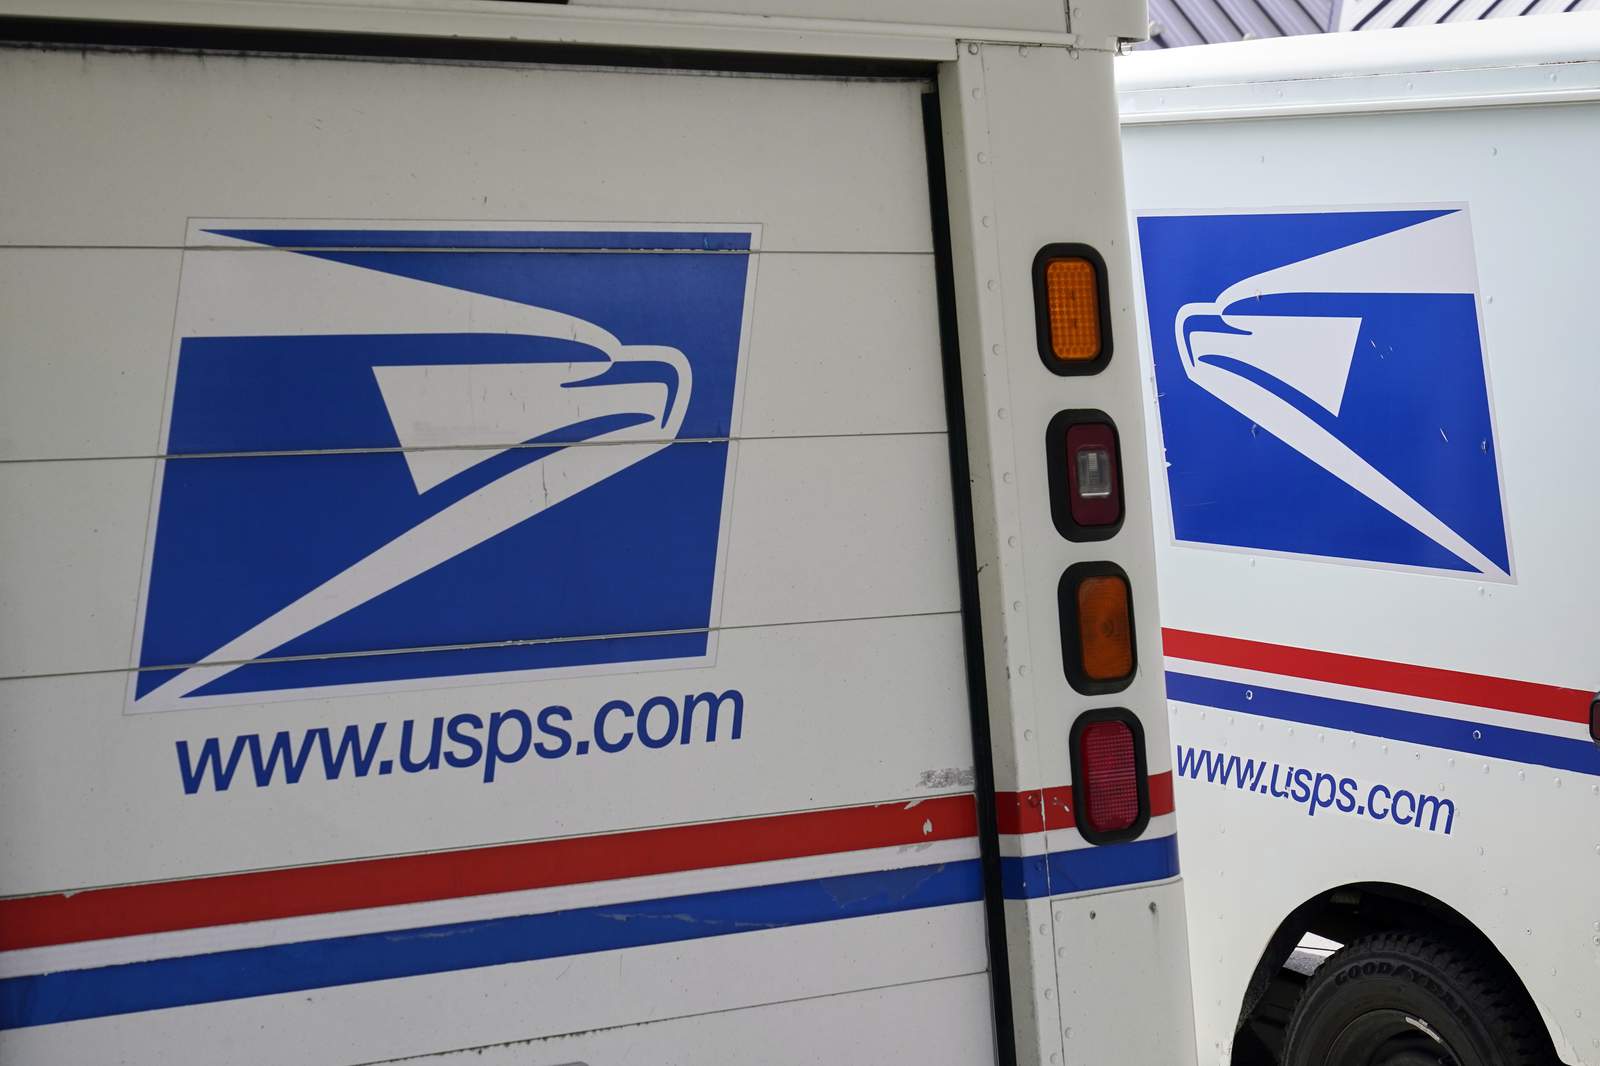 Post Office confessional: ‘The norm over the last several years'